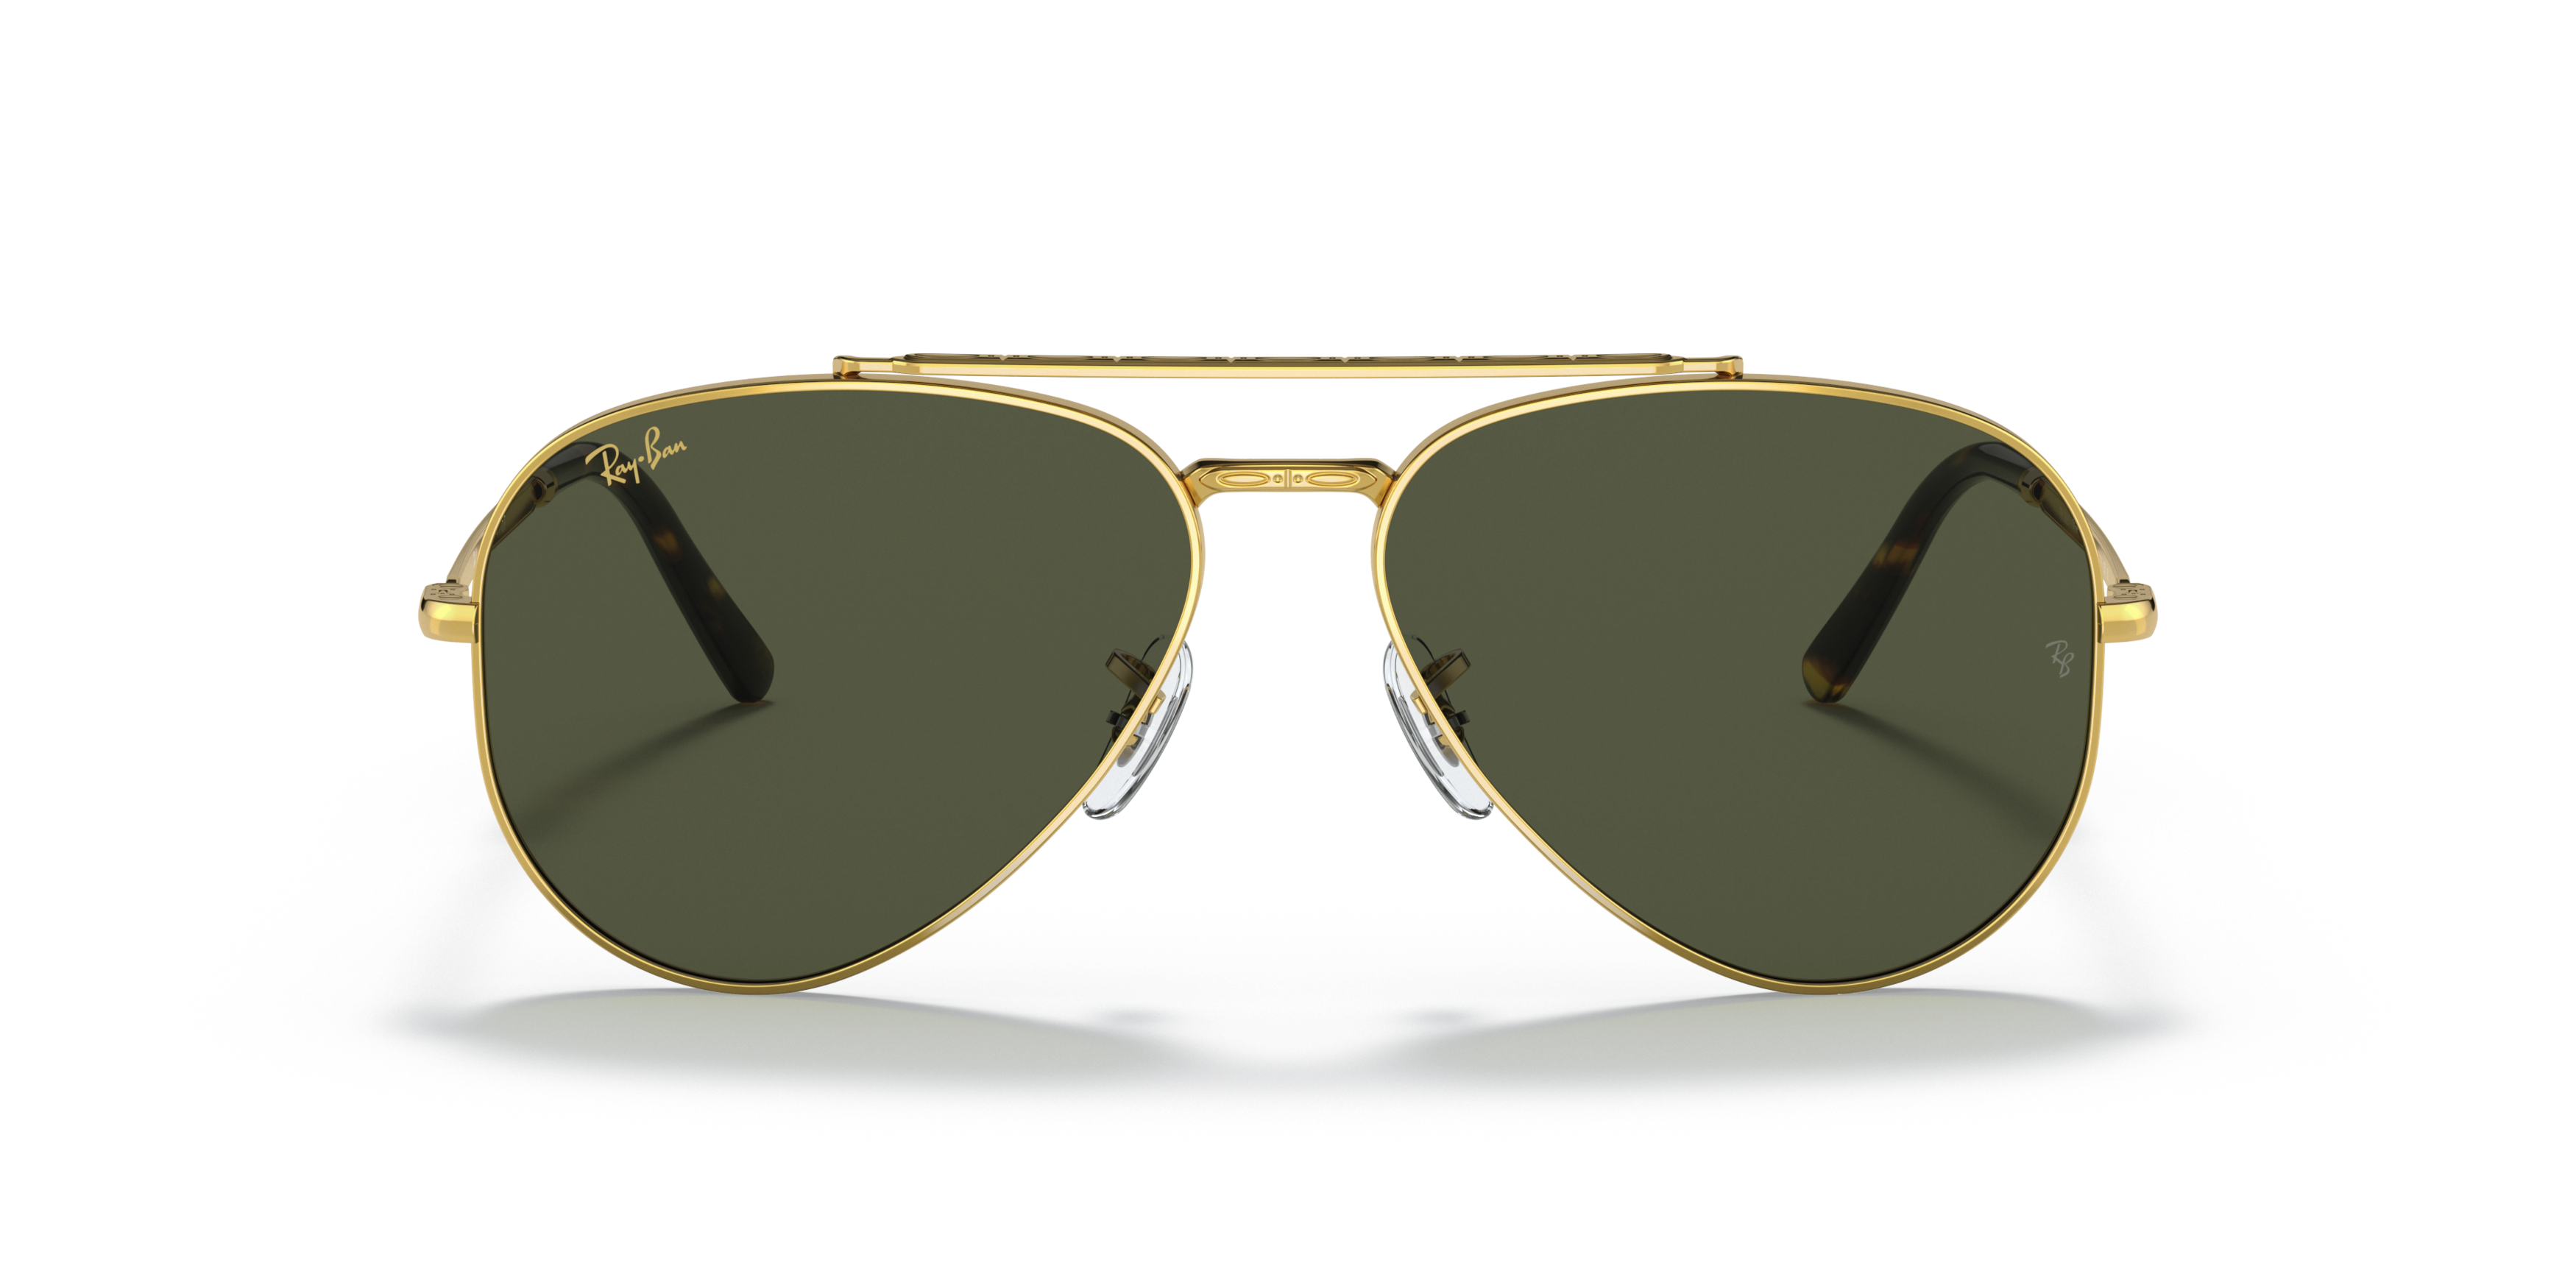 [products.image.front] Ray-Ban New Aviator RB3625 919631